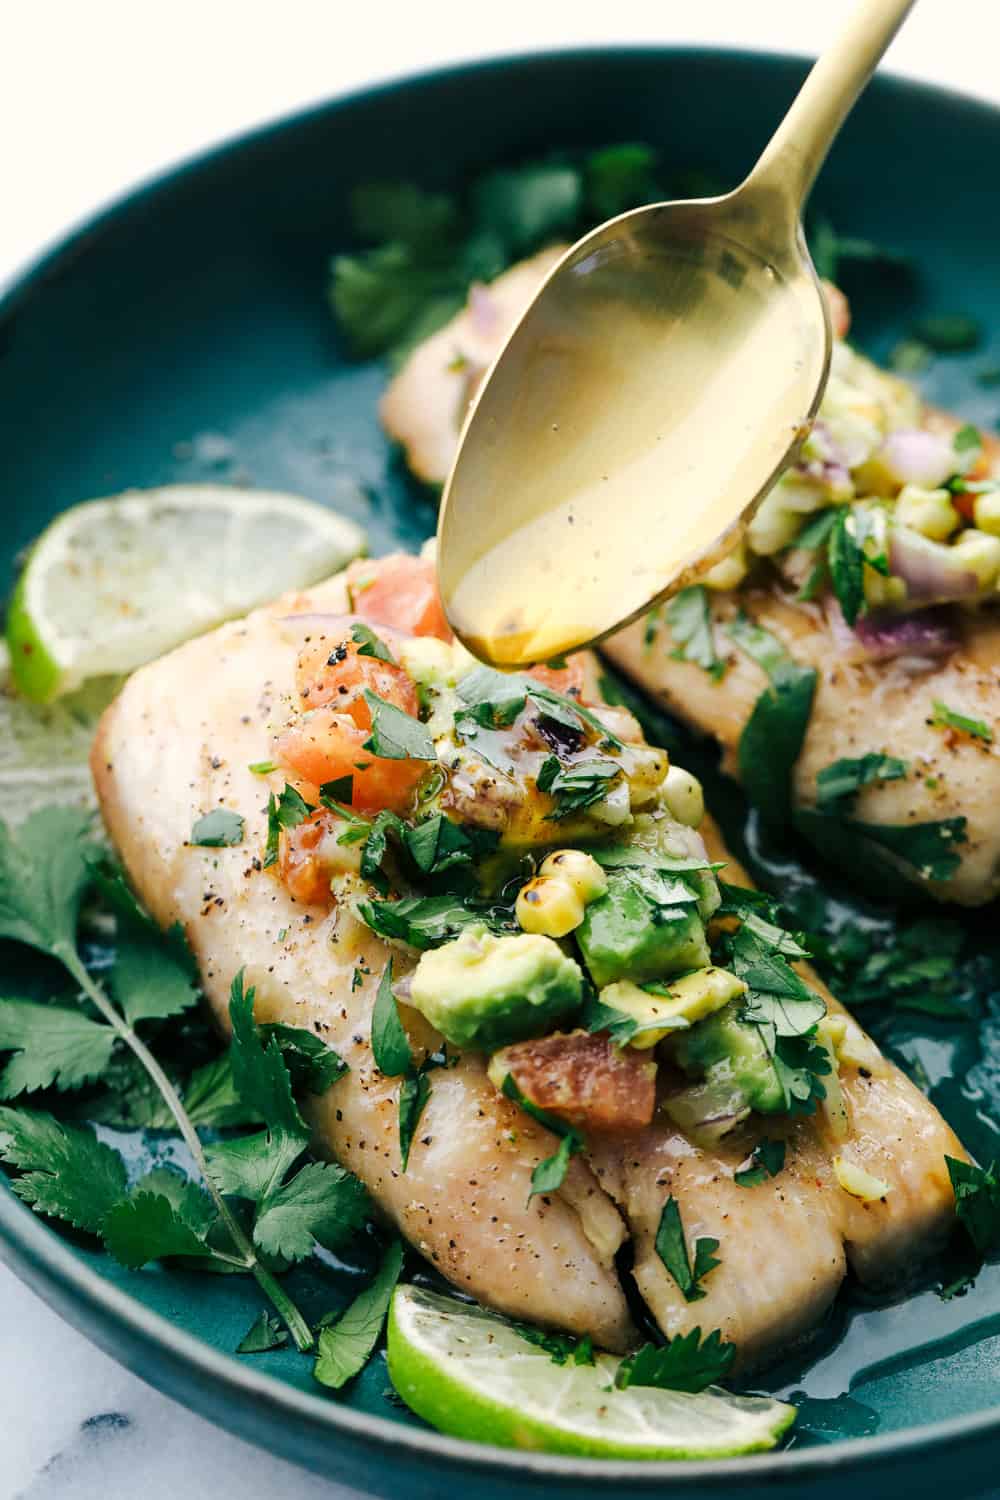 Mahi Mahi served on a plate garnished with avocado salsa and drizzled with brown butter sauce.